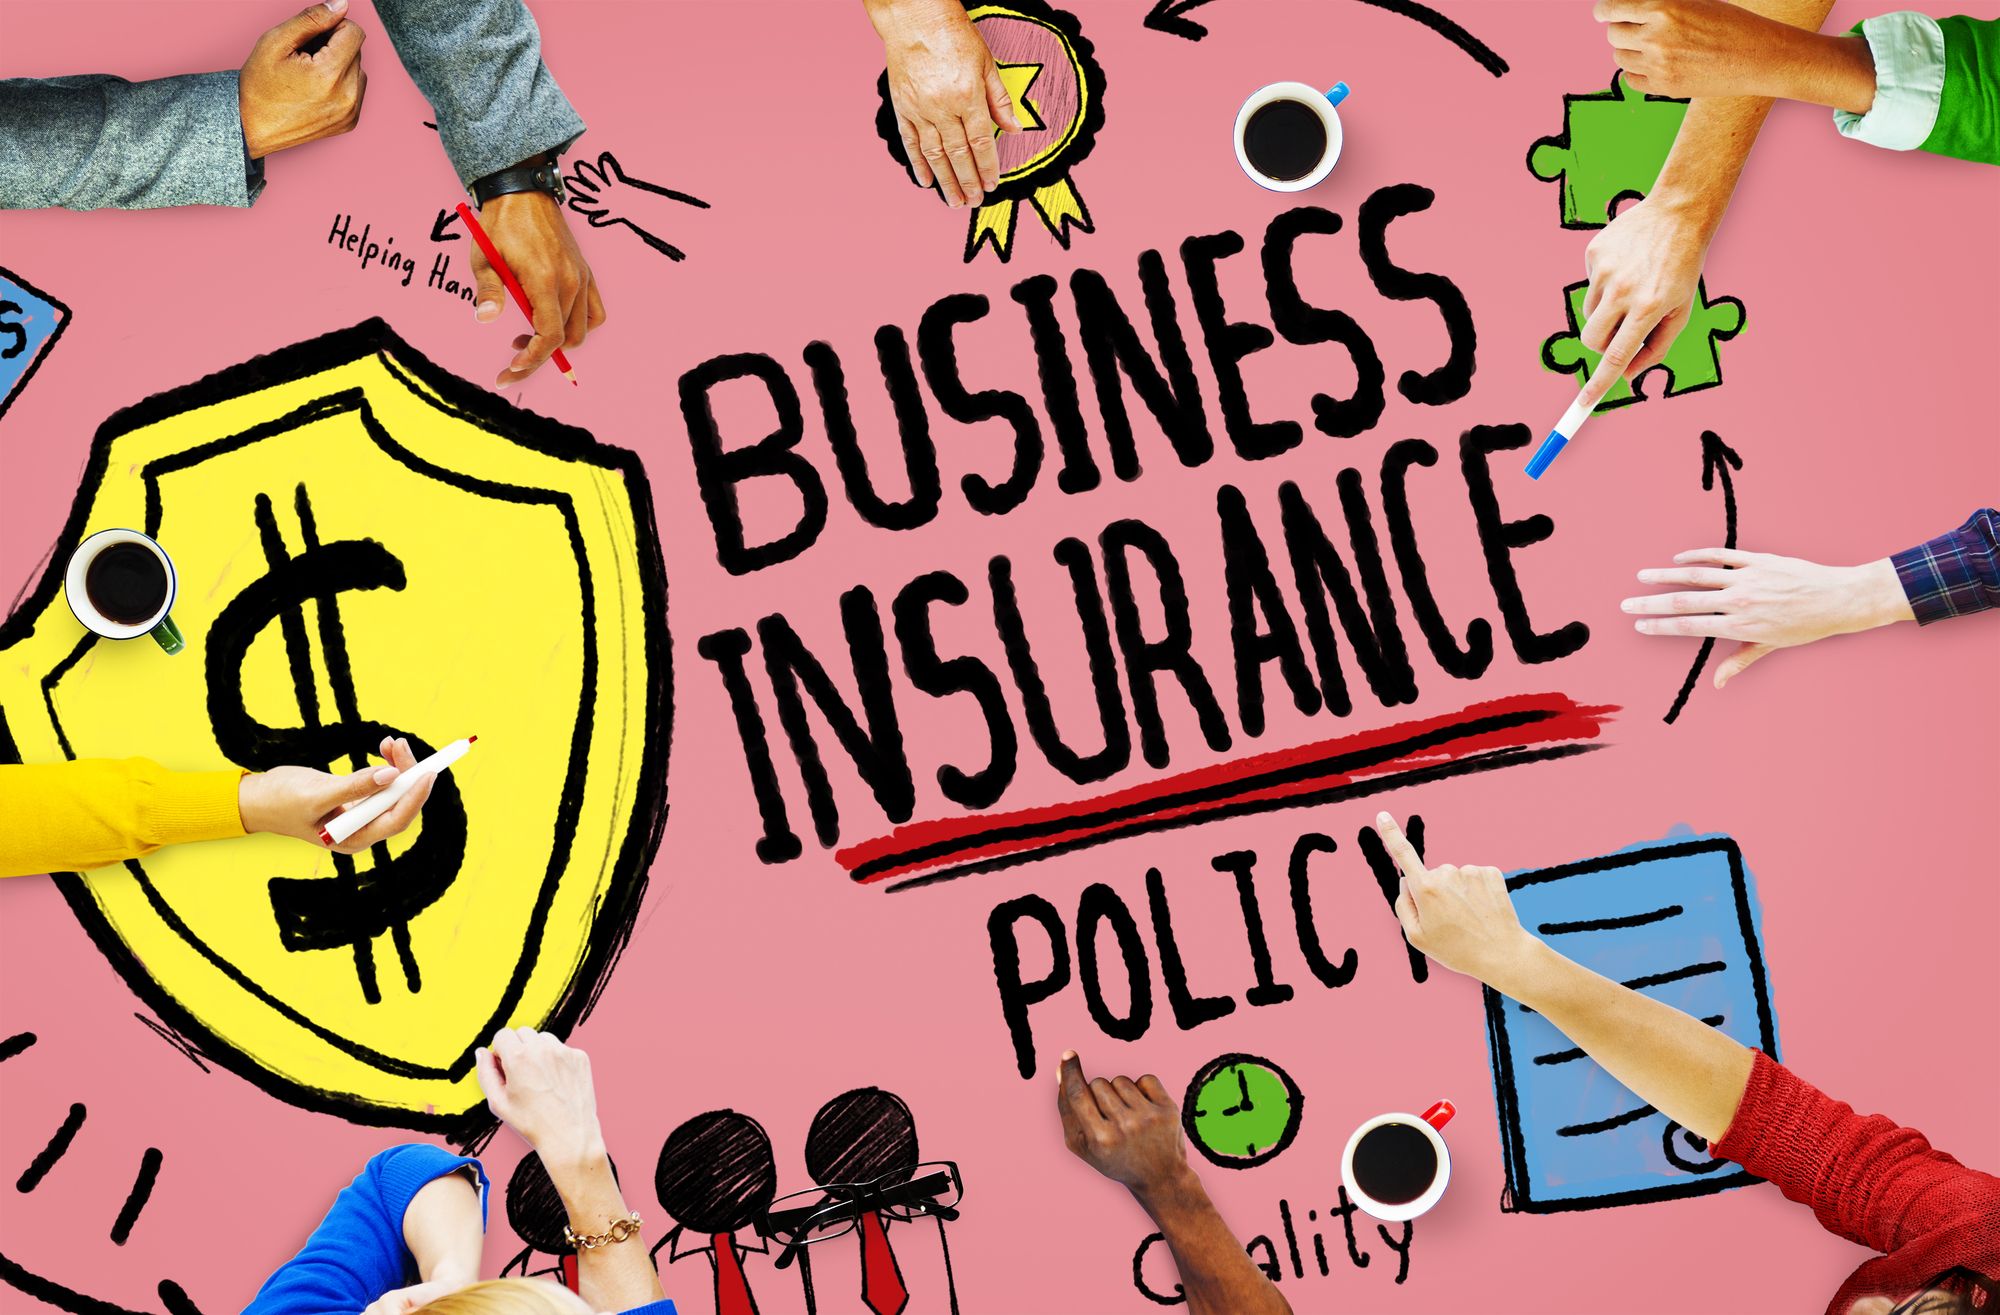 Business insurance policy sign regarding the class action lawsuit filed against insurance companies not paying losses to businesses.